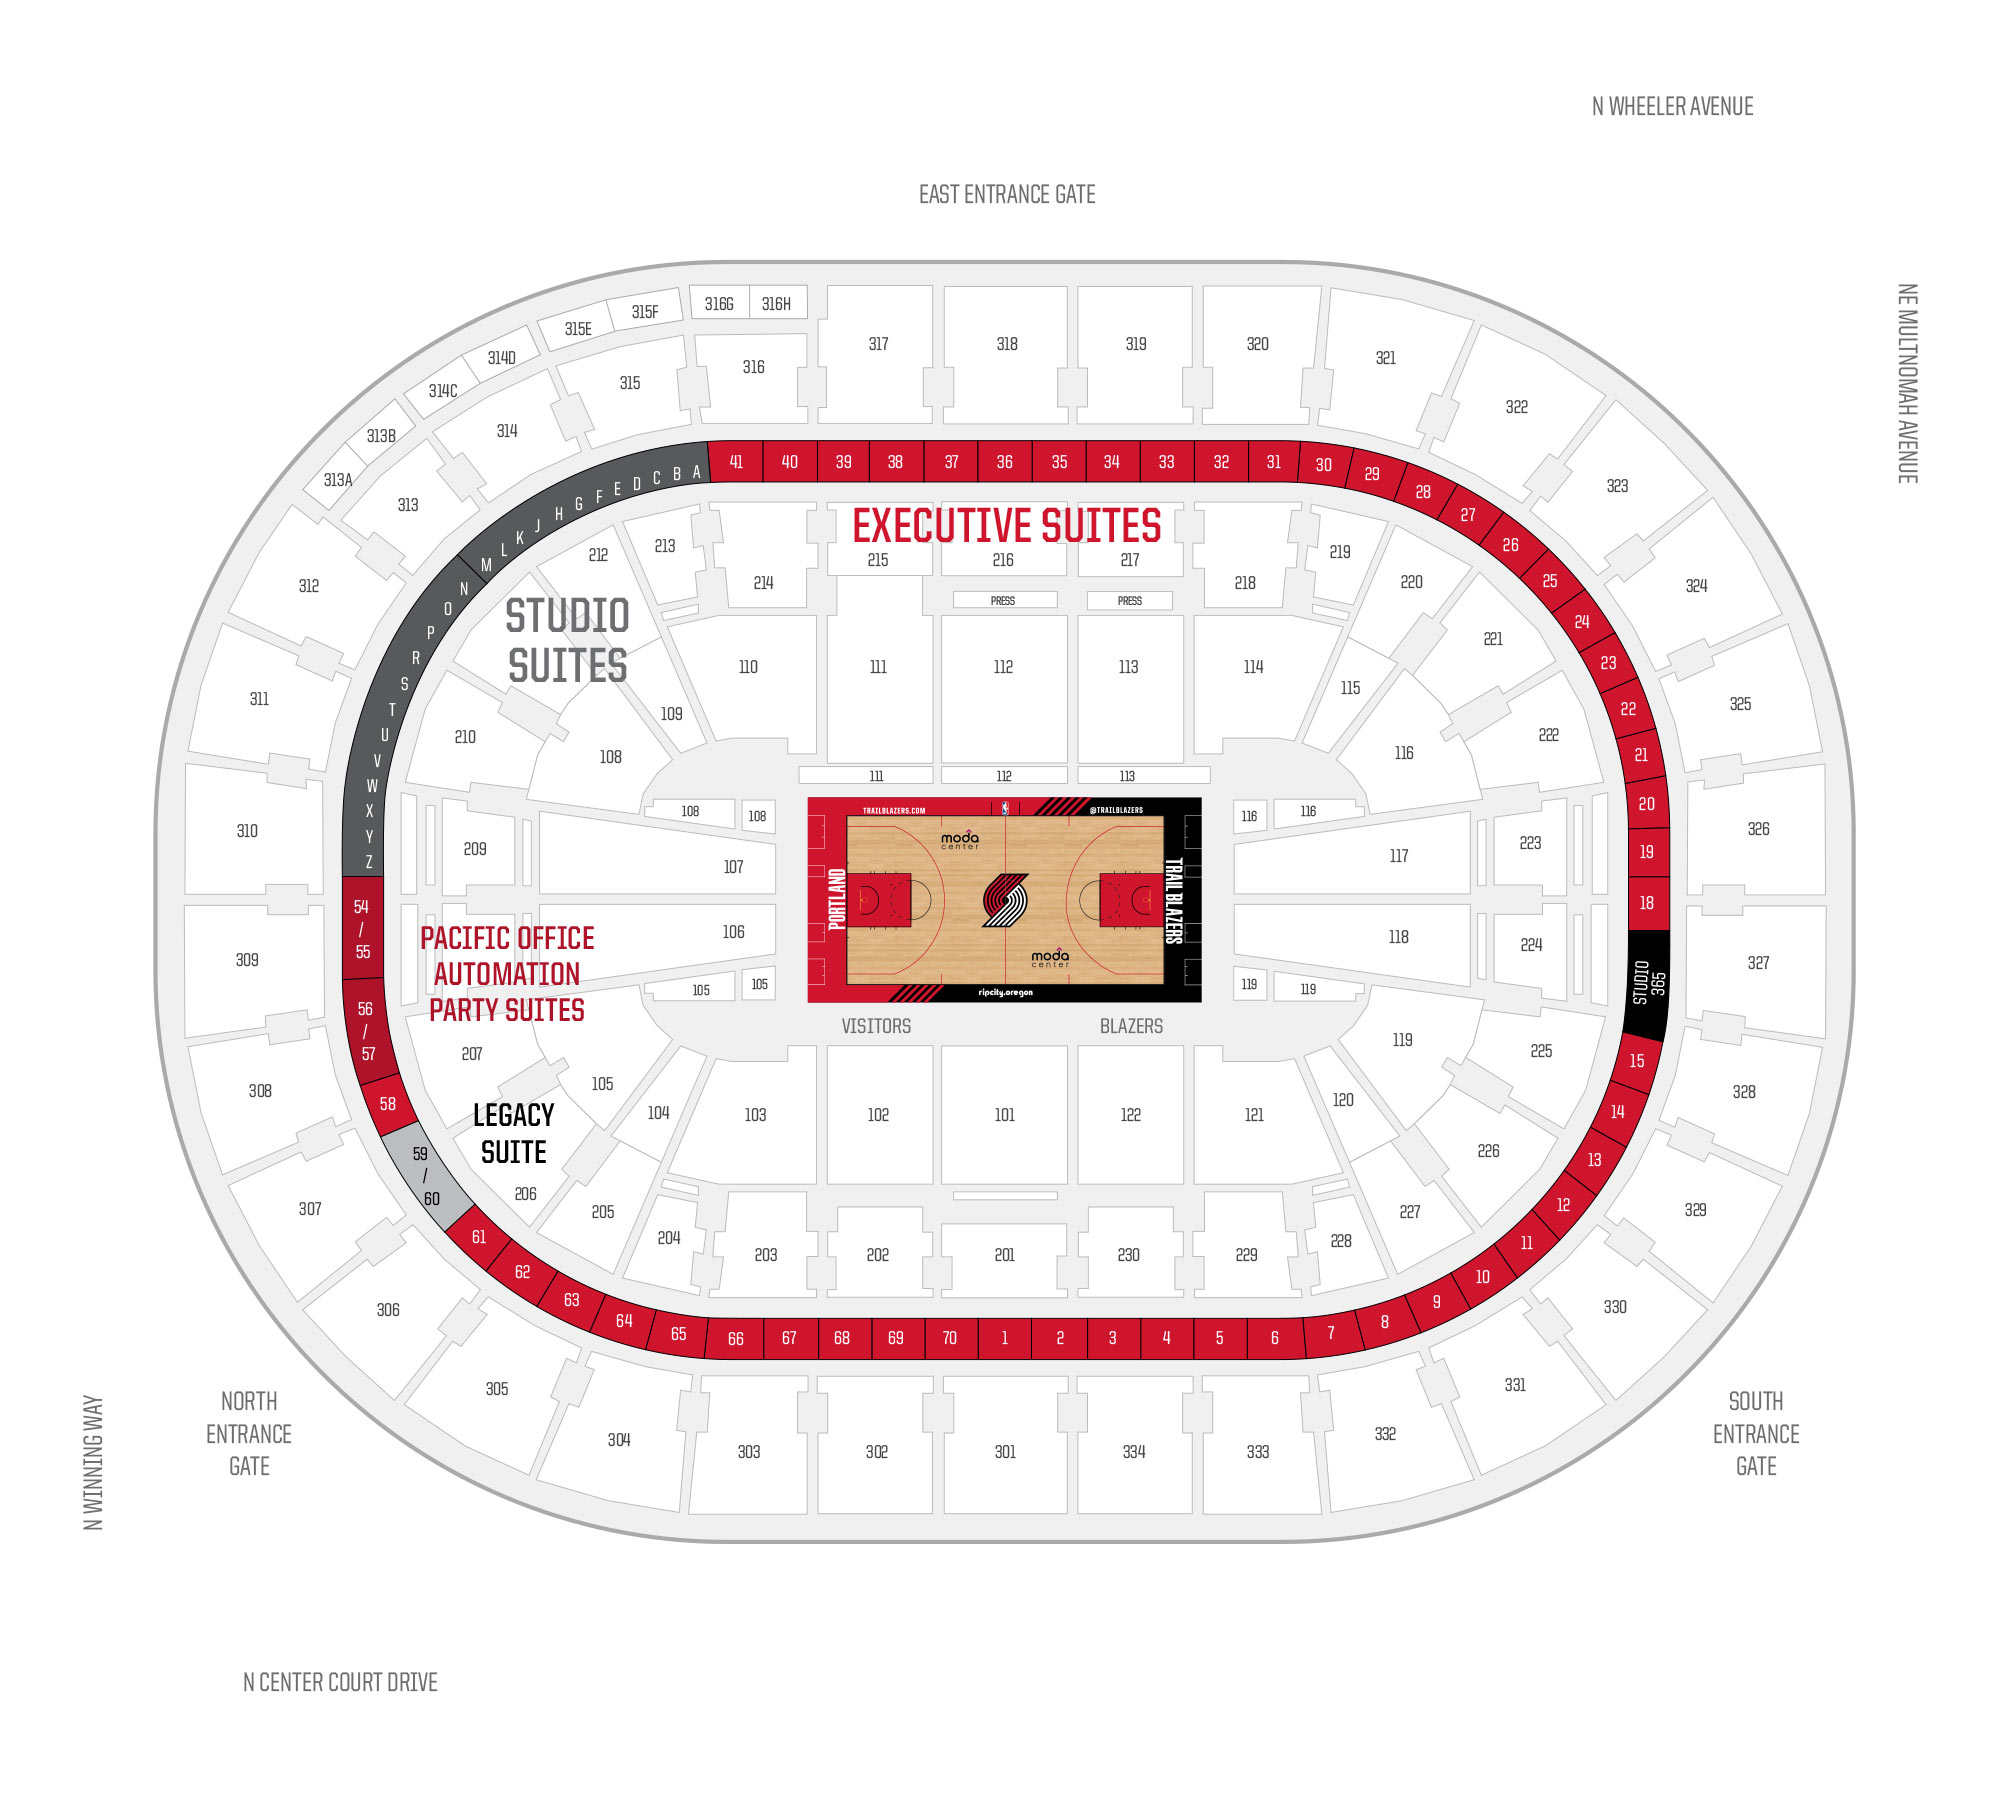 Moda Center / Portland Trail Blazers Suite Map and Seating Chart